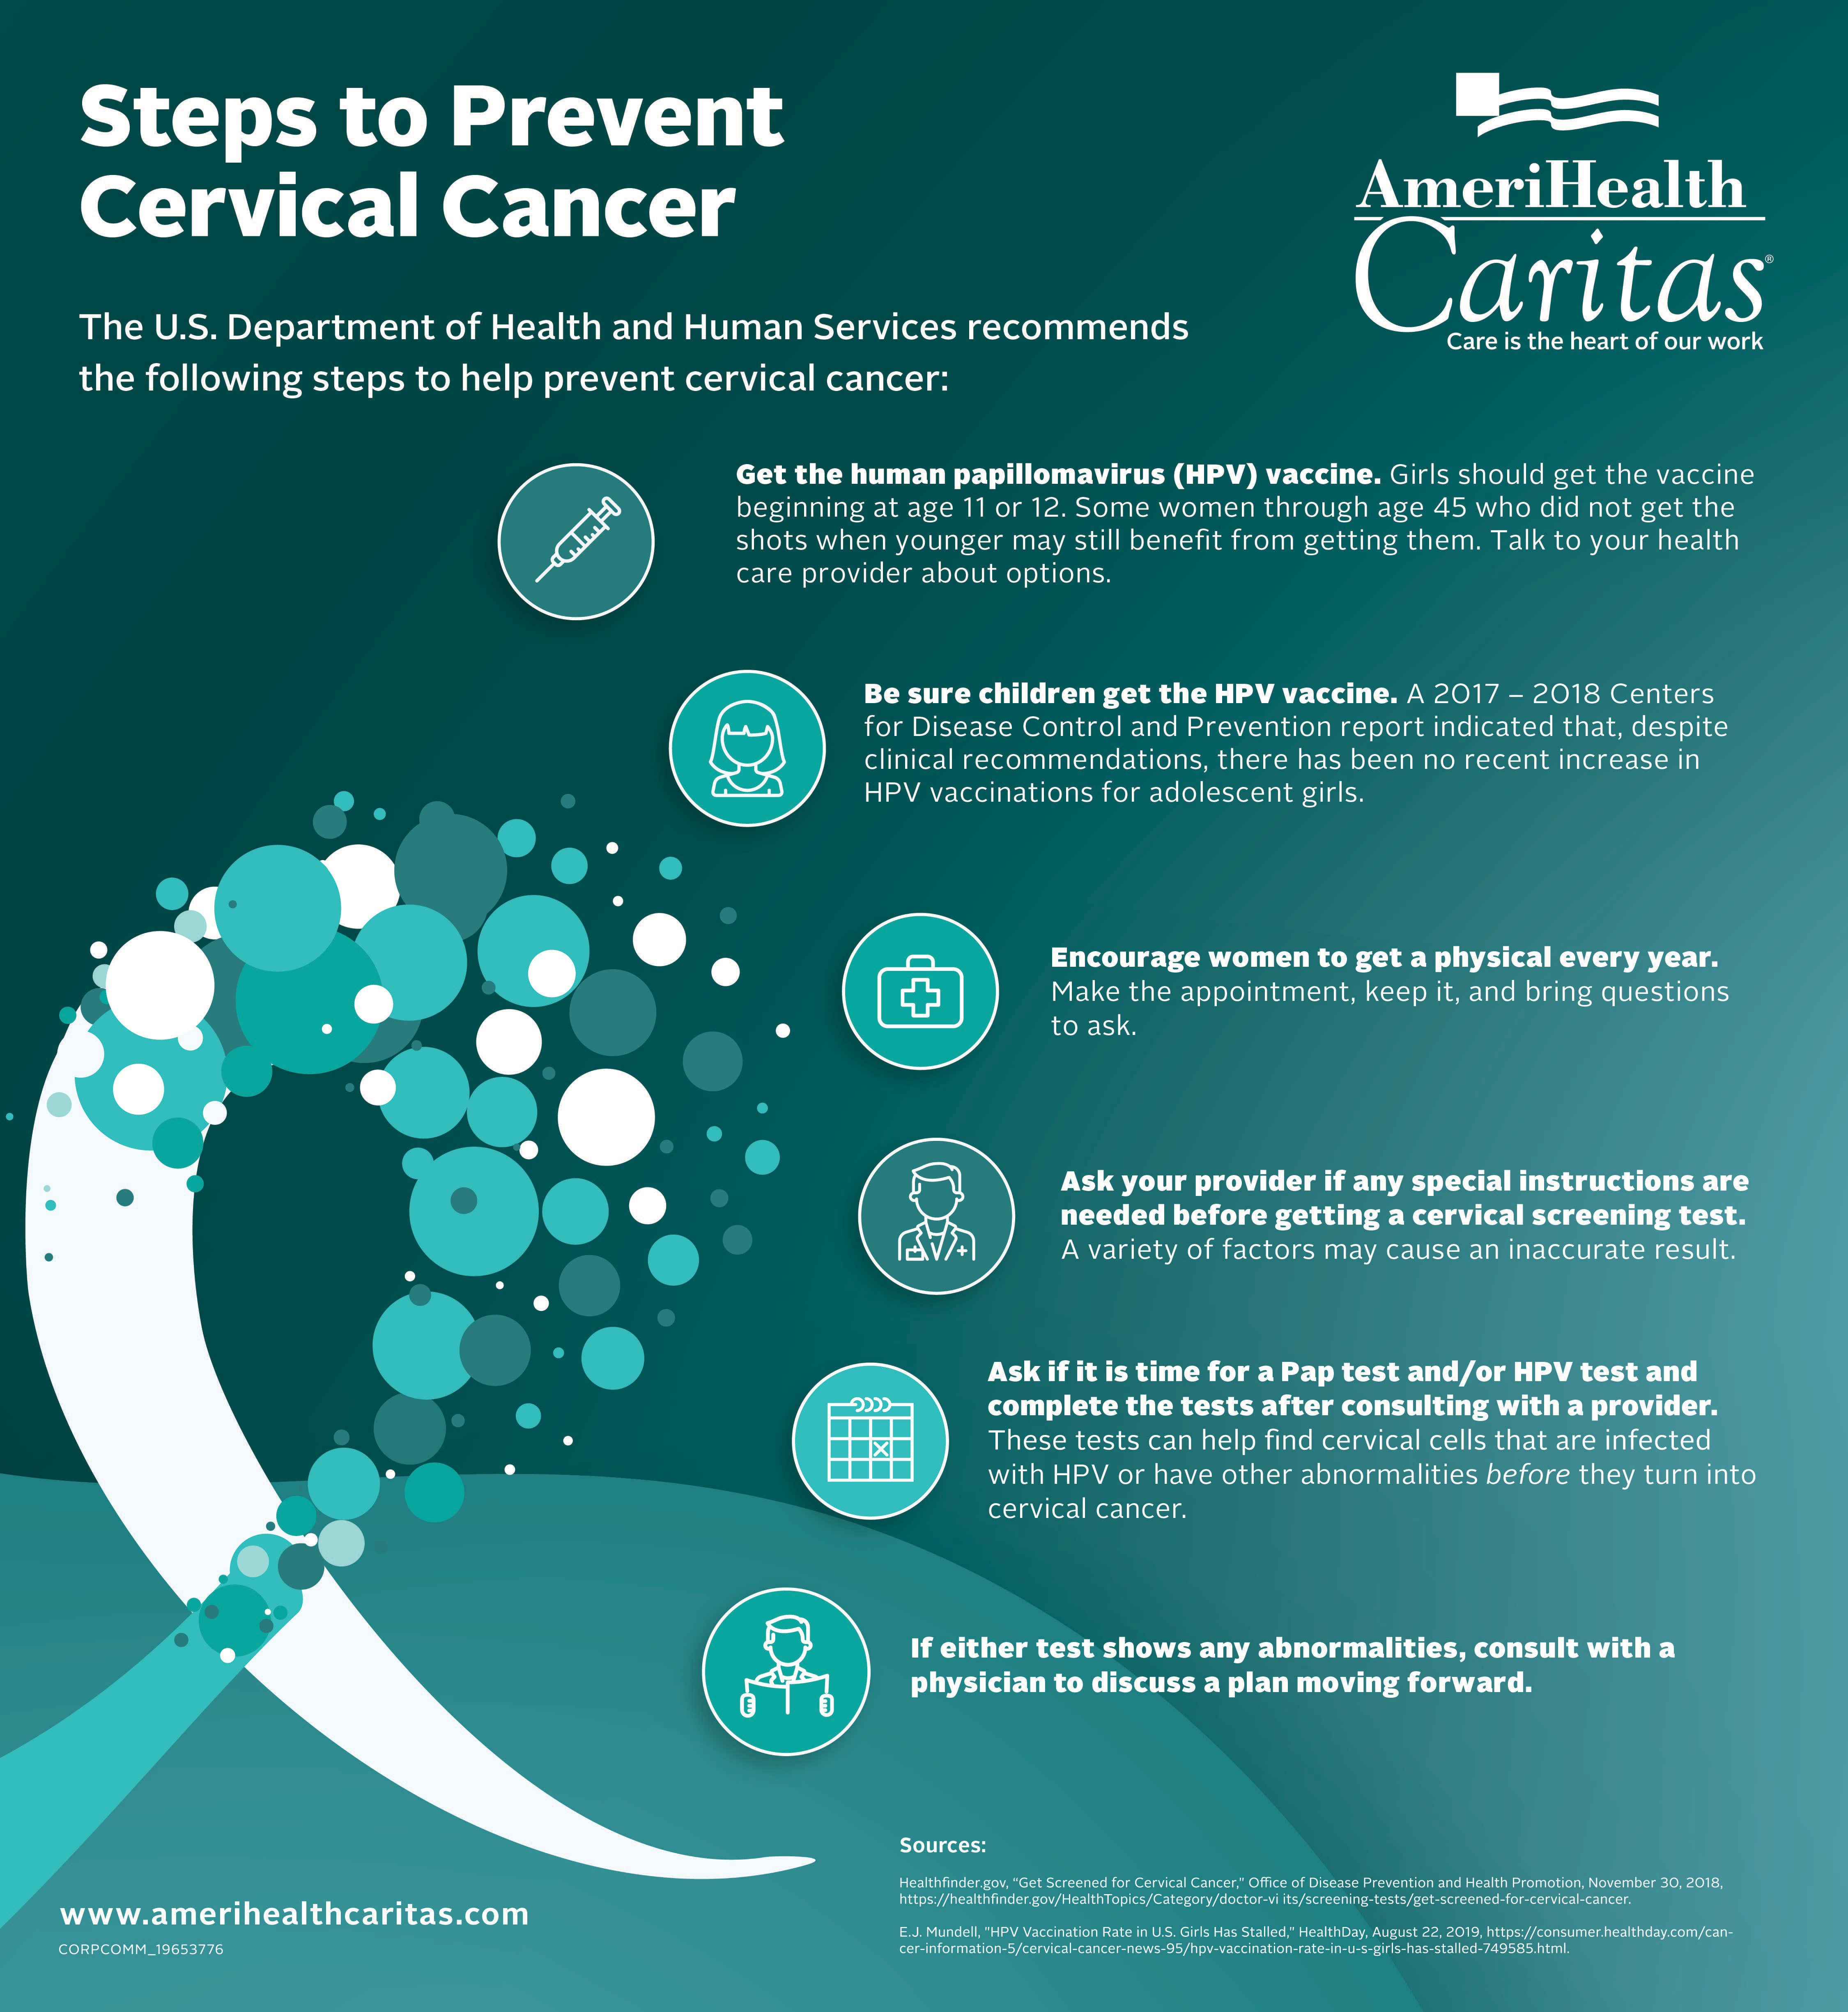 Six Tips To Help Your Patients Prevent Cervical Cancer 3785